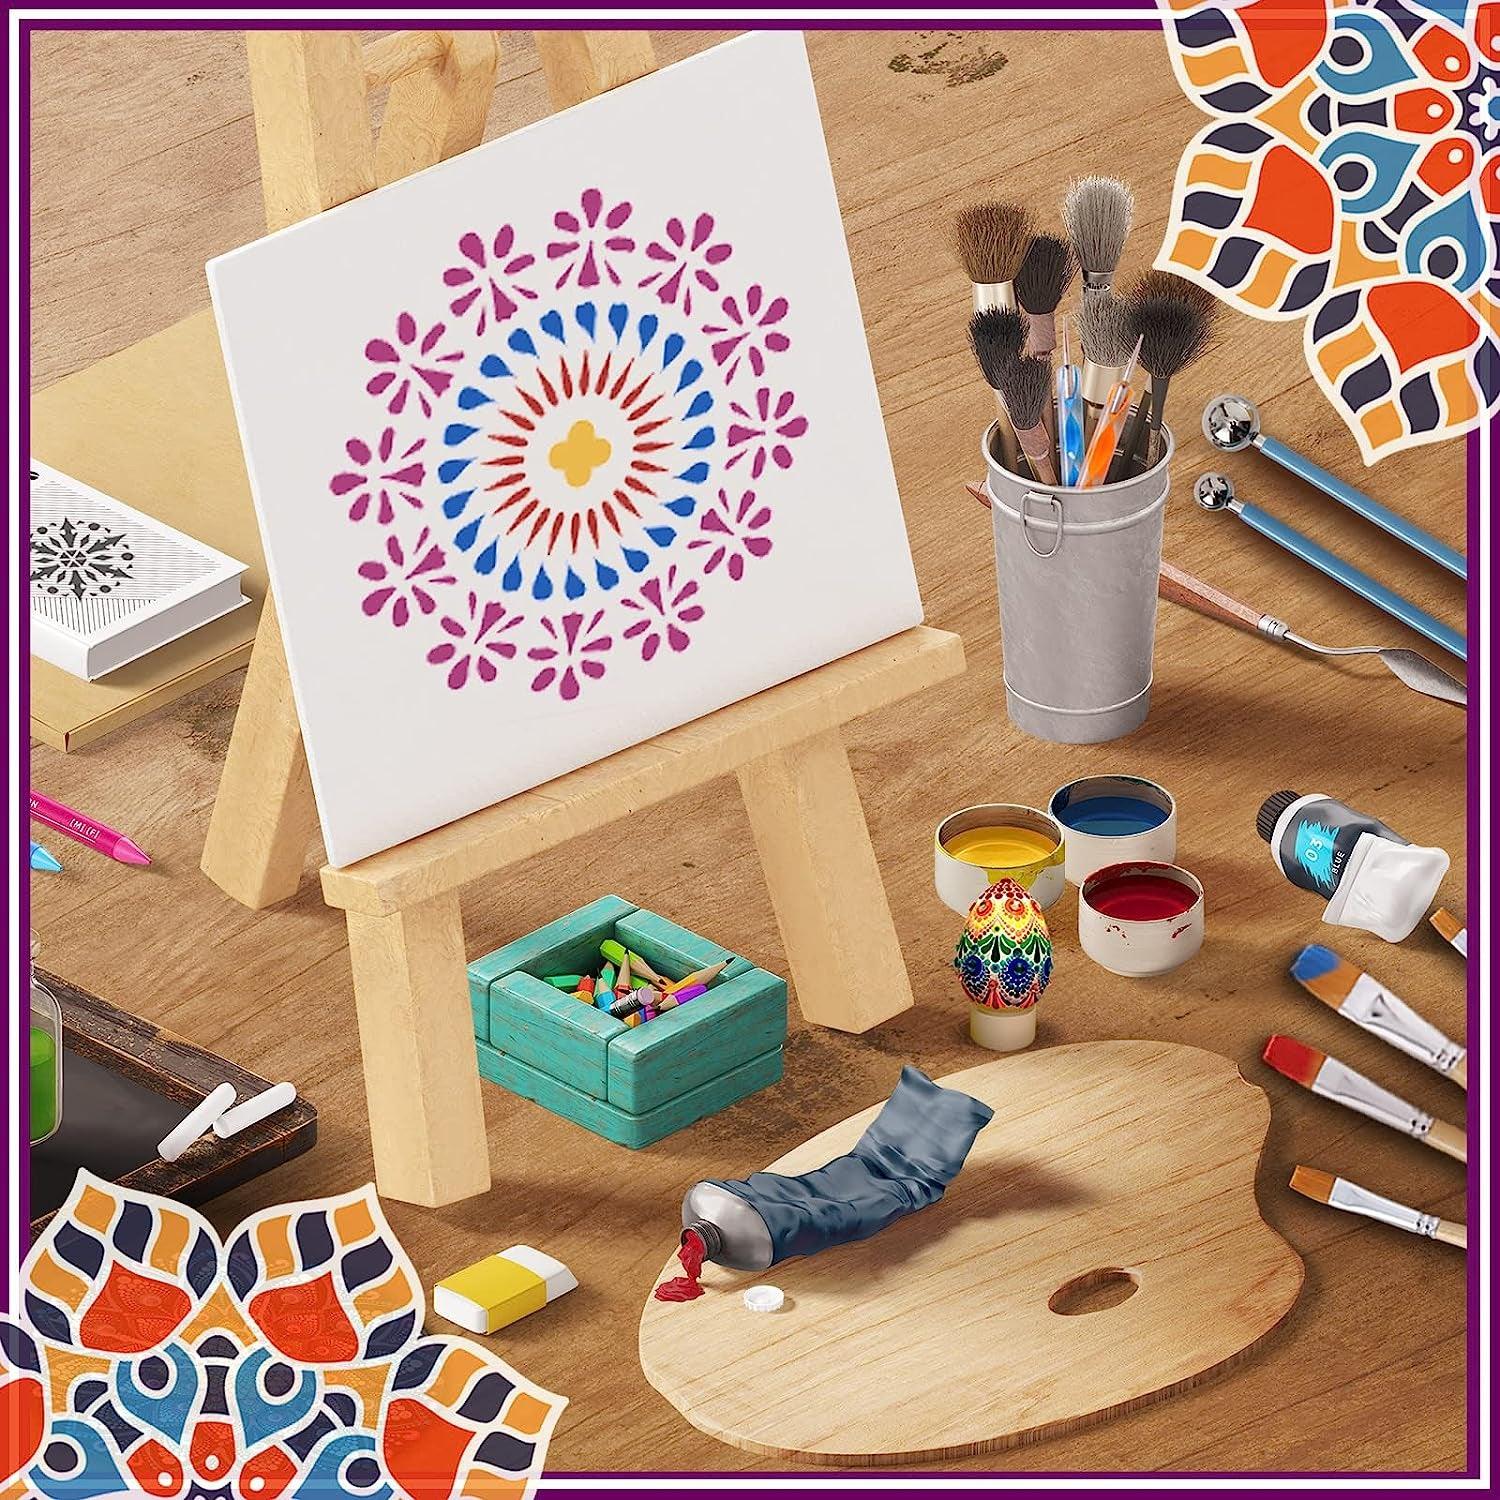 Complete Beginner's Mandala Painting 48 Piece Kit with Acrylic Paints, Reusable Stencils and Dotting Tools. Fun Rock Art & DIY Craft project.